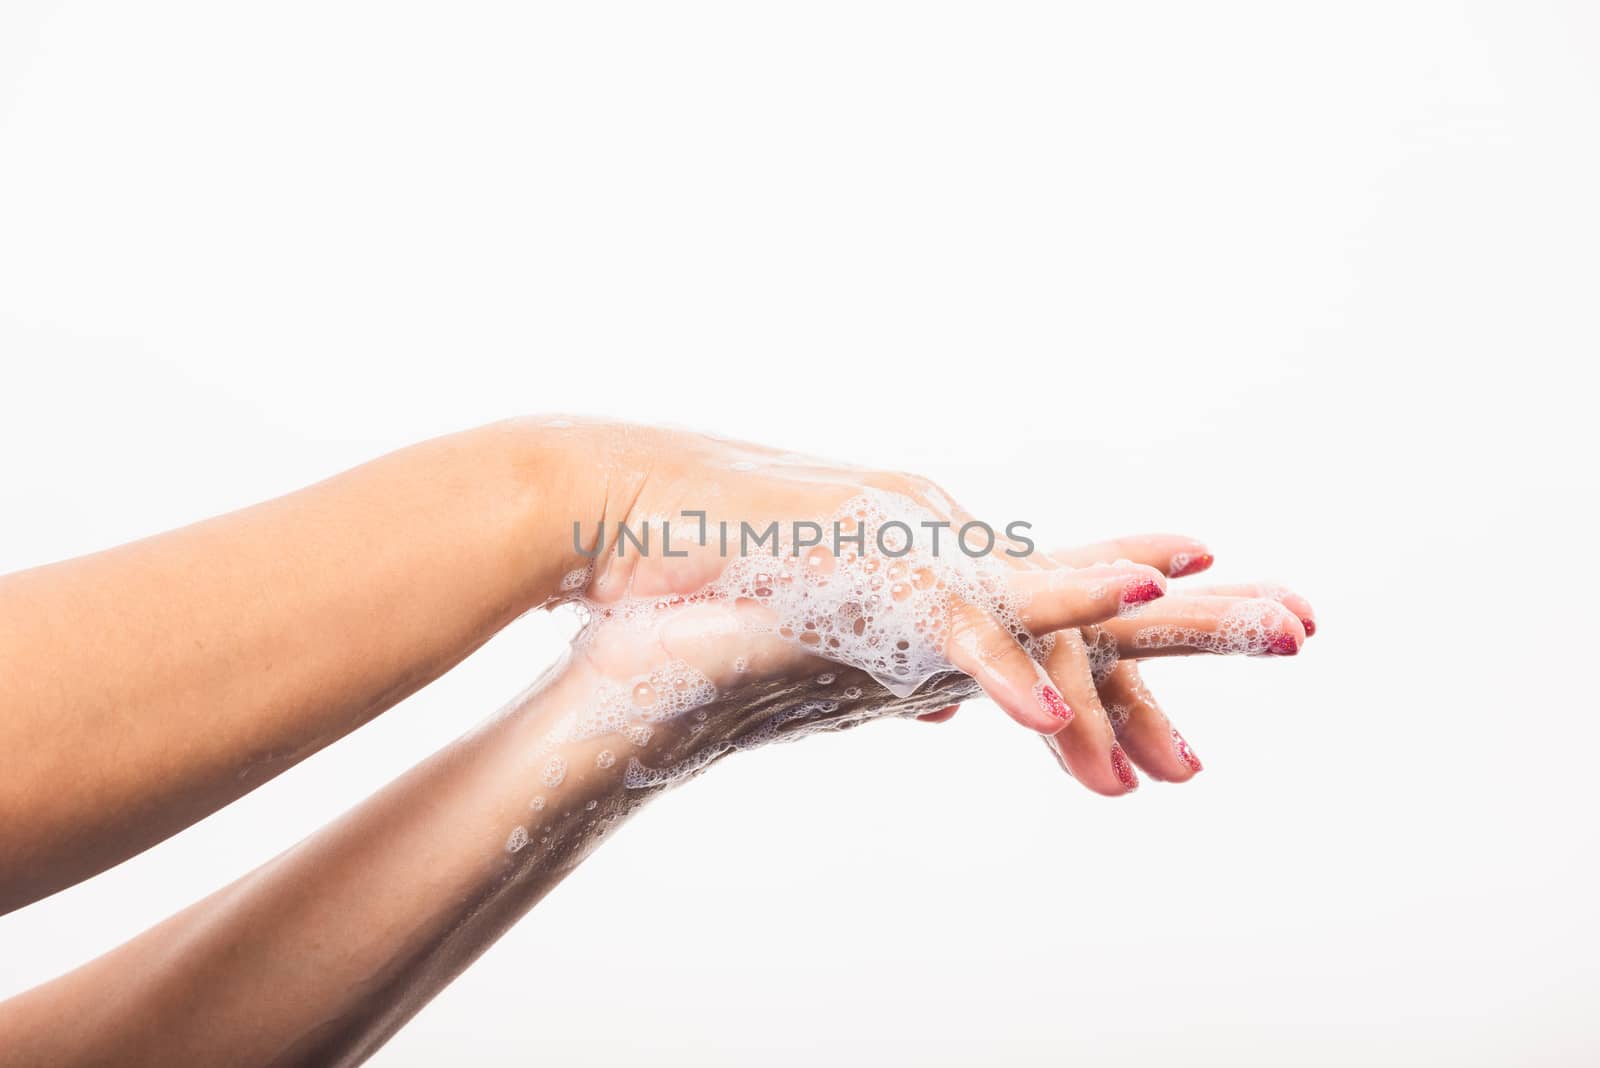 Closeup young Asian woman washing hands by soap for cleanliness and prevent germs coronavirus, studio shot isolated on white background, Healthcare medical COVID-19 virus concept